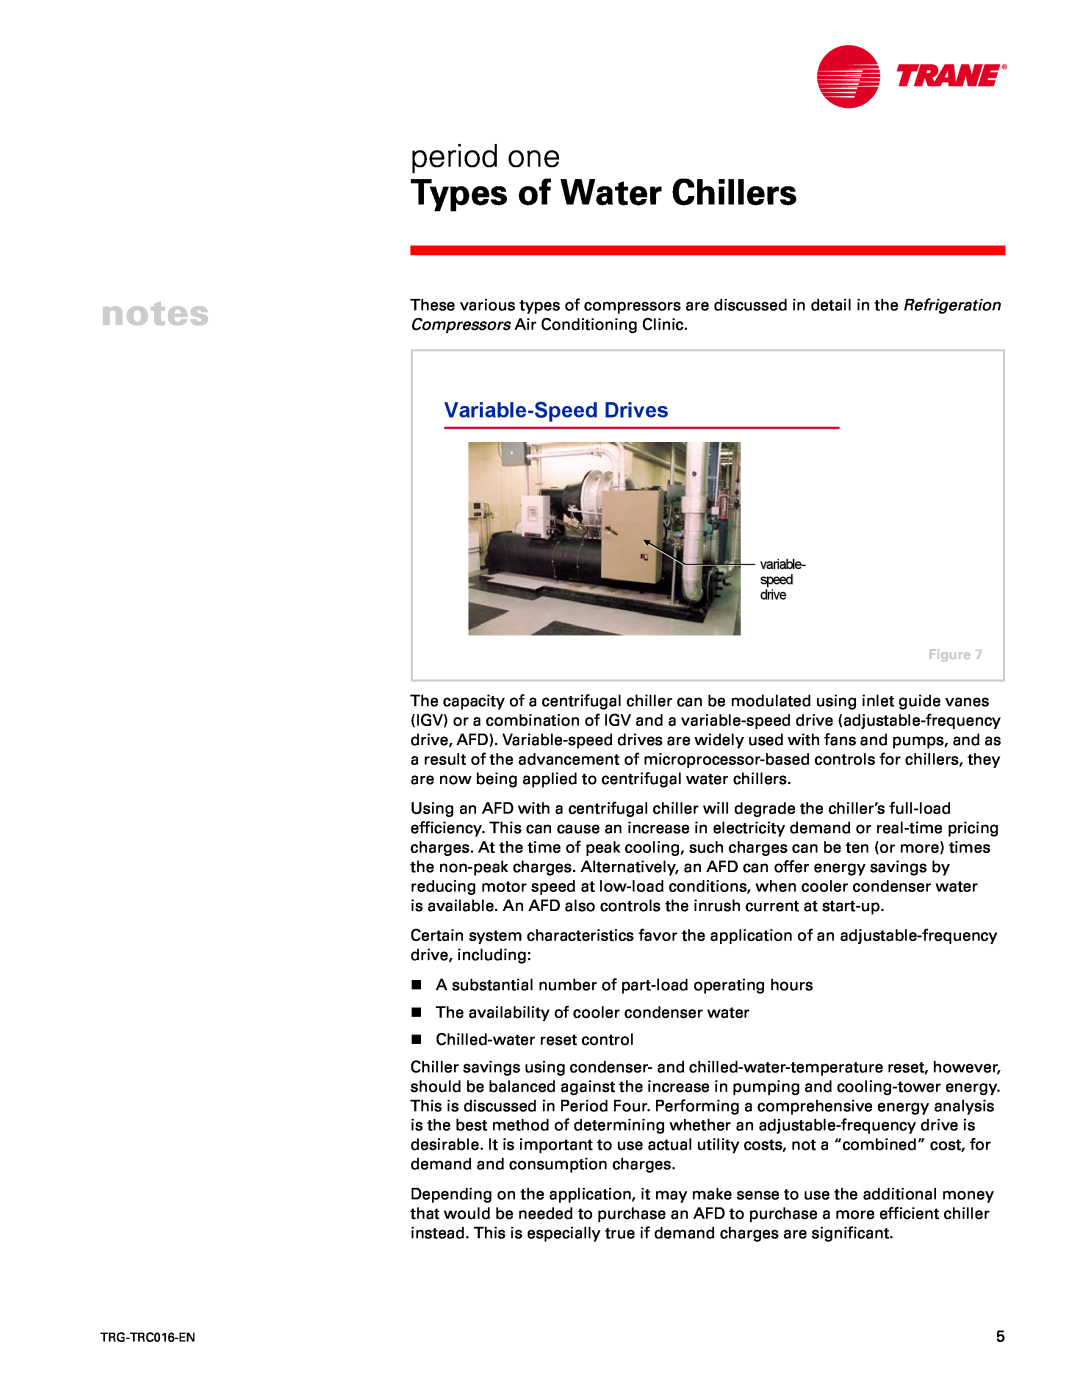 Trane TRG-TRC016-EN manual Variable-SpeedDrives, notes, Types of Water Chillers, period one 